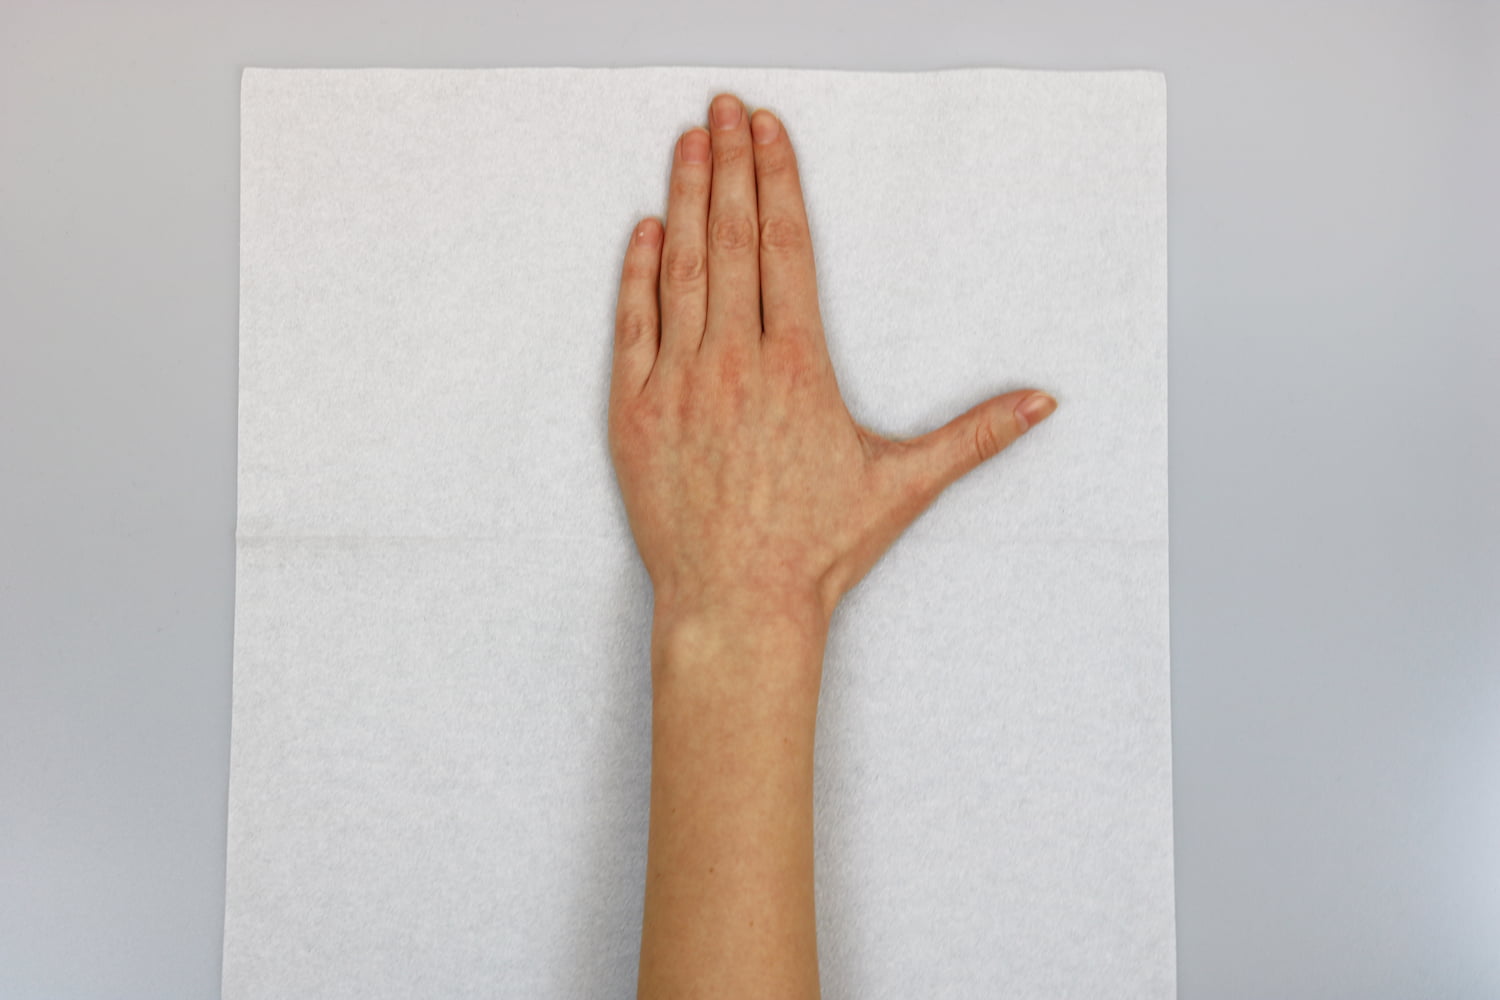 Hand positioned on a paper towel to make a pattern for an orthosis.